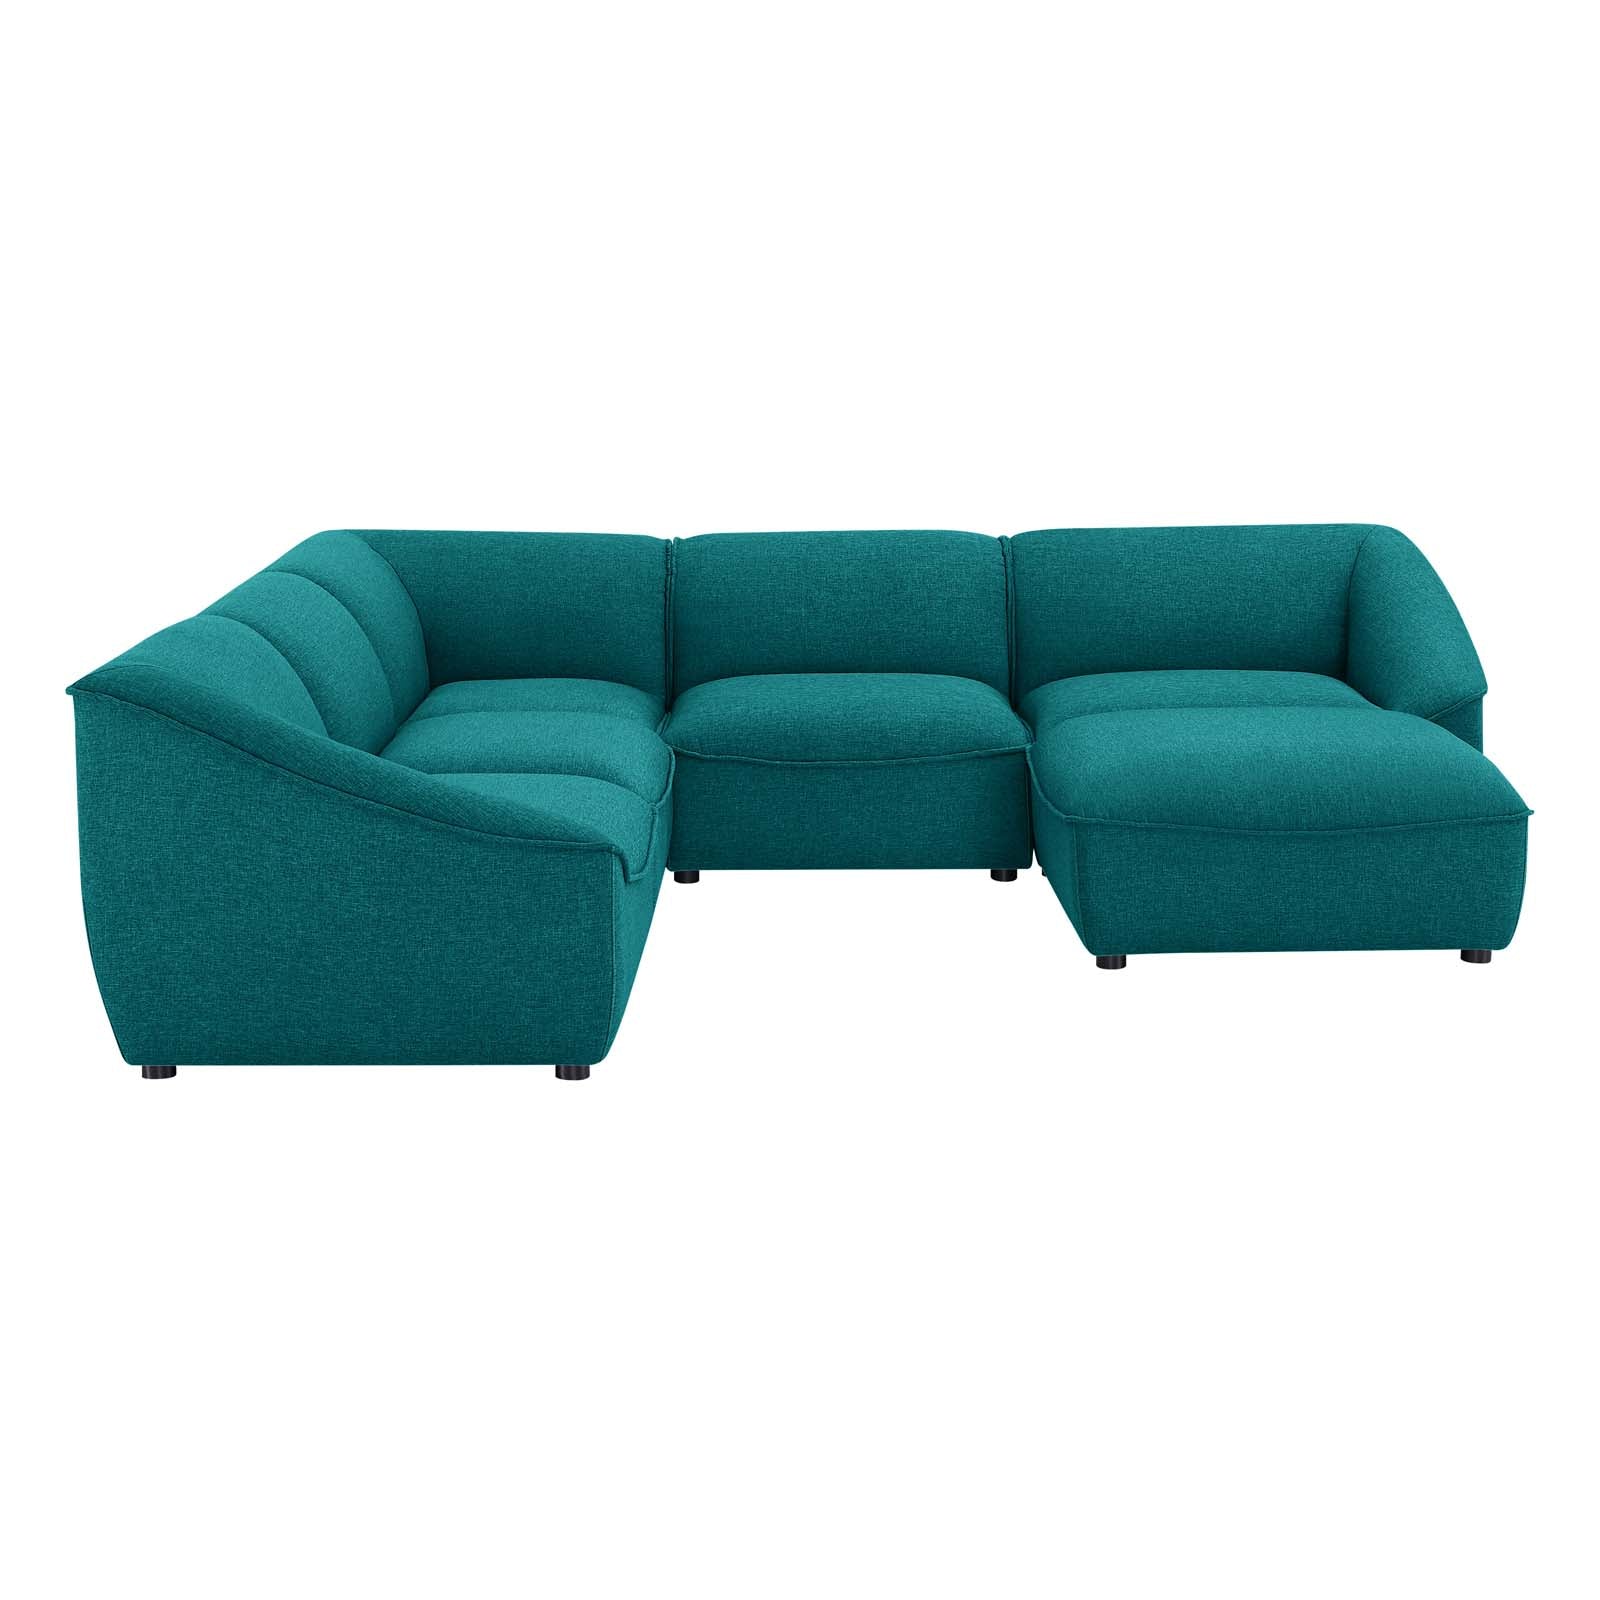 Comprise 6-Piece Sectional Sofa - East Shore Modern Home Furnishings